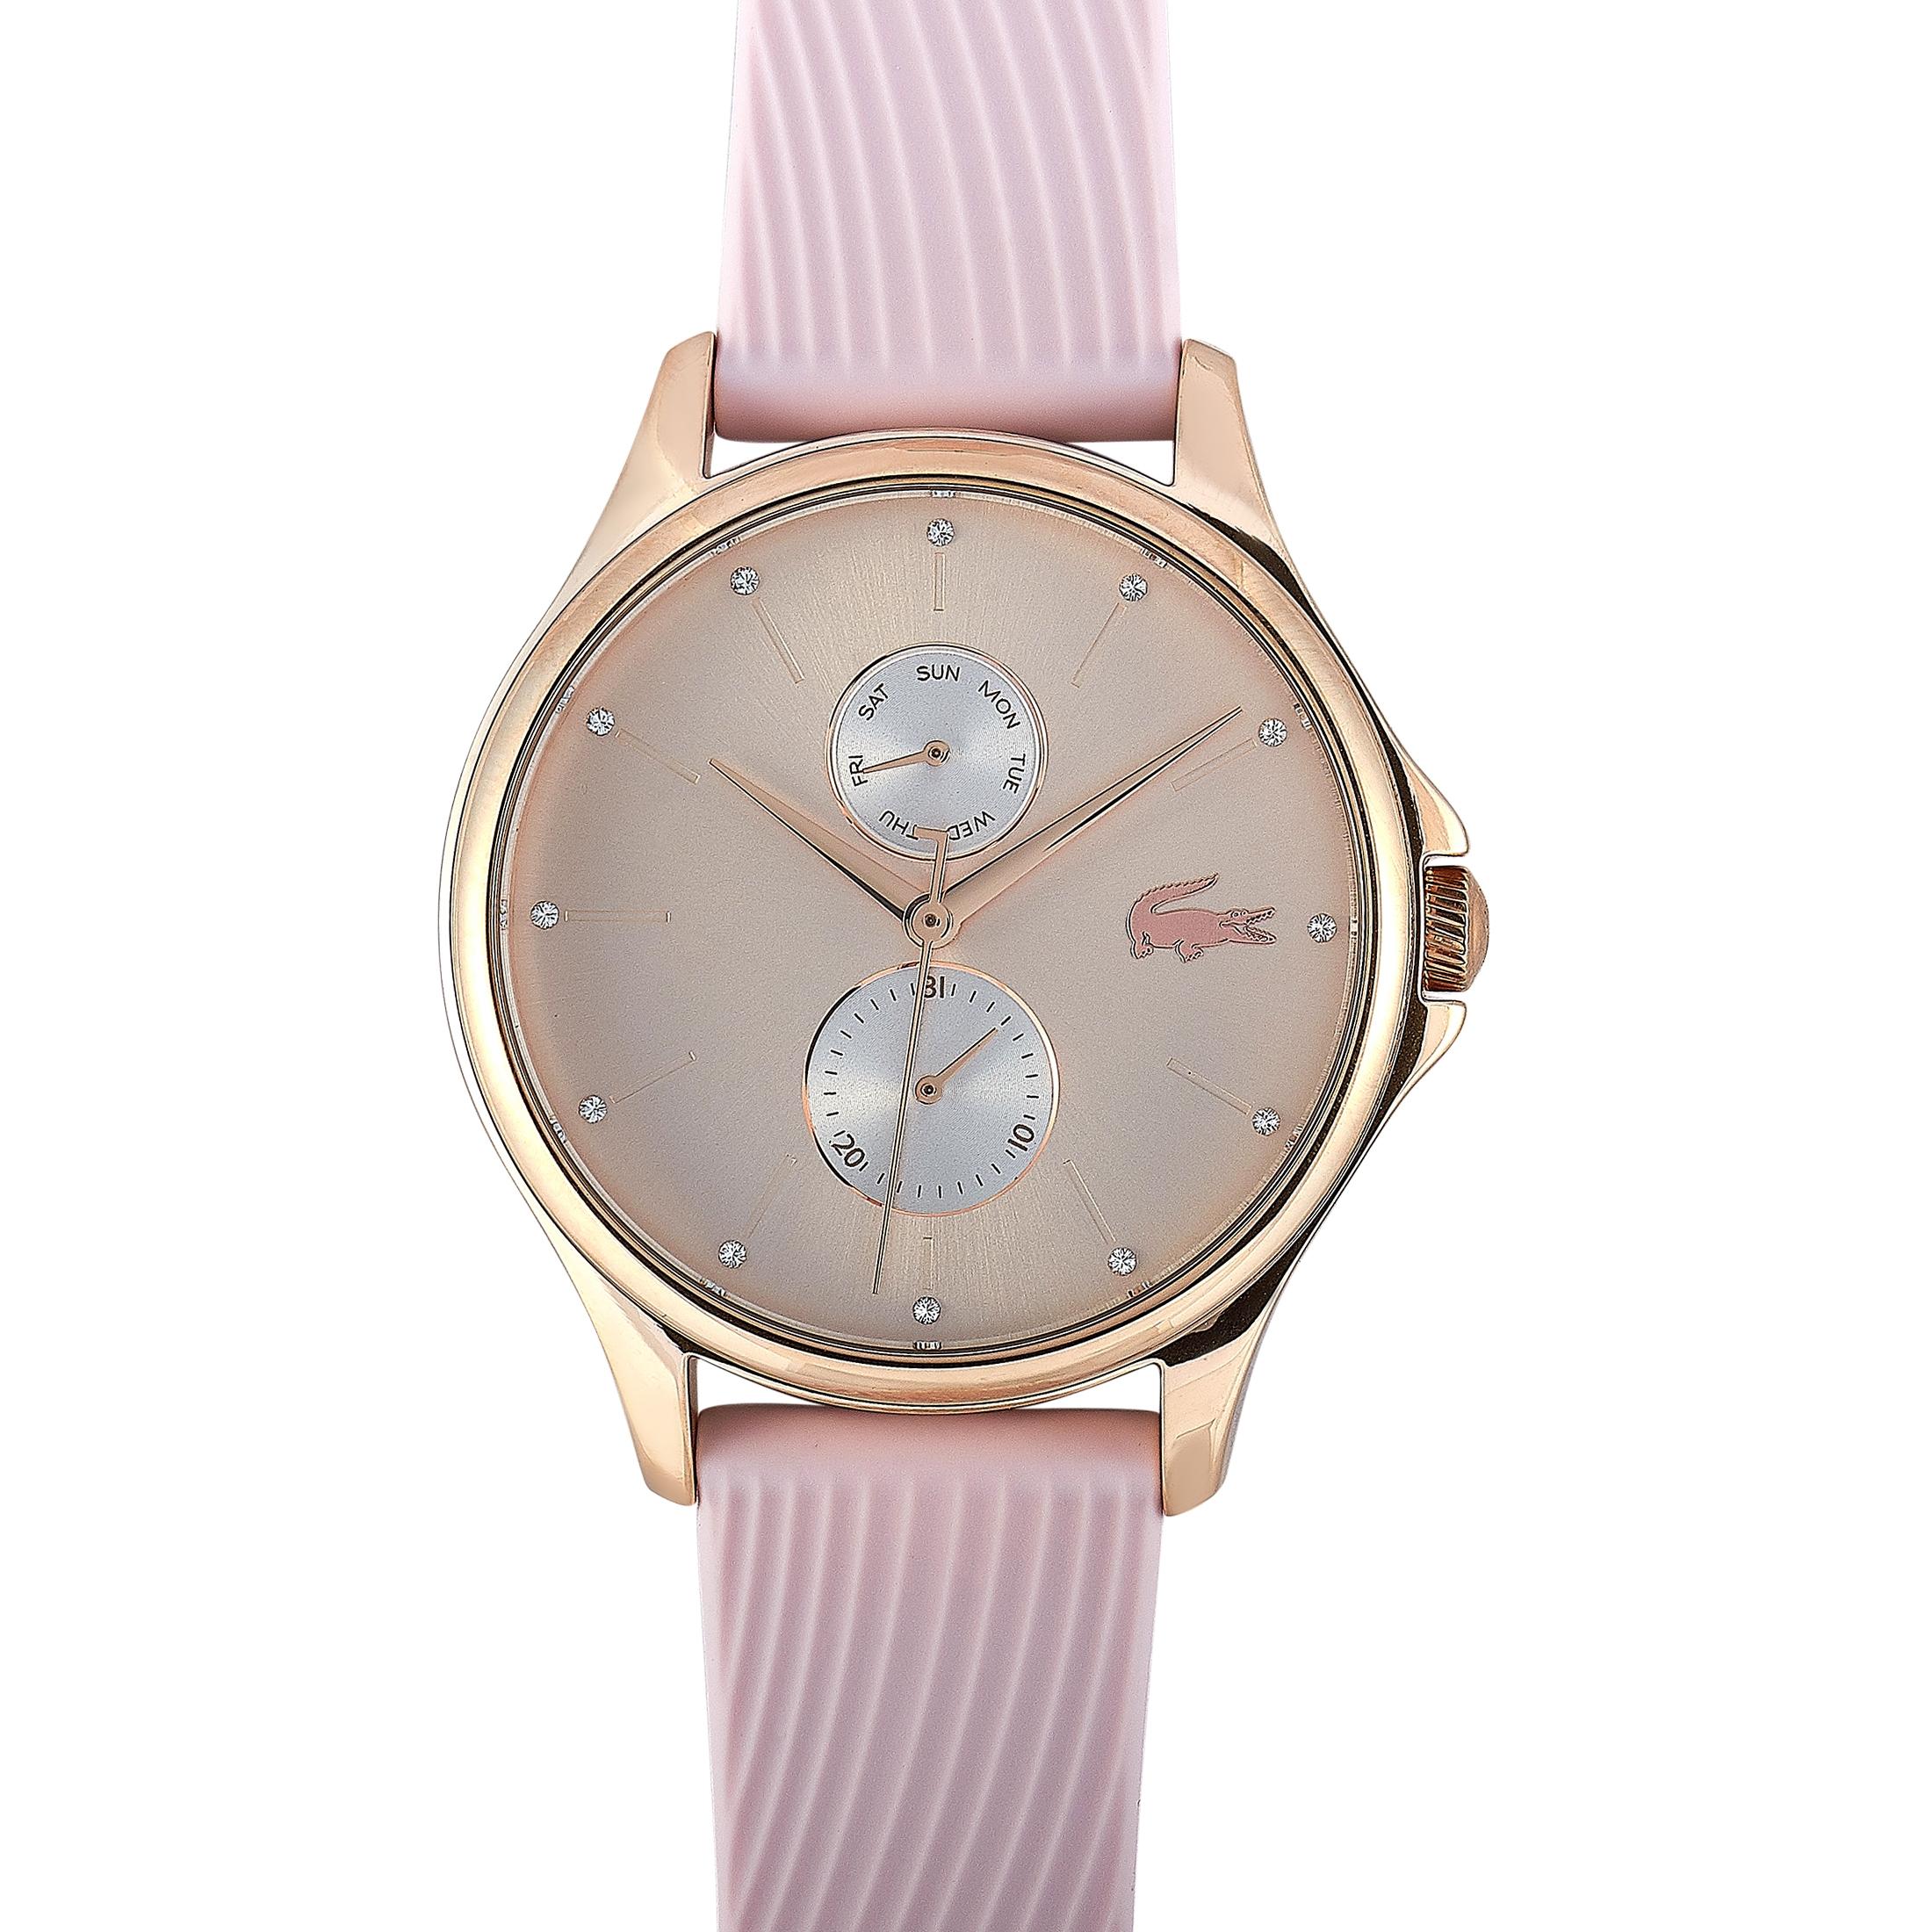 This is the Lacoste Kea watch, reference number 2001025.
 
 It is presented with a rose gold-tone stainless steel case that measures 38 mm in diameter. The case is water-resistant to 30 meters and mounted onto a light pink silicone strap, secured